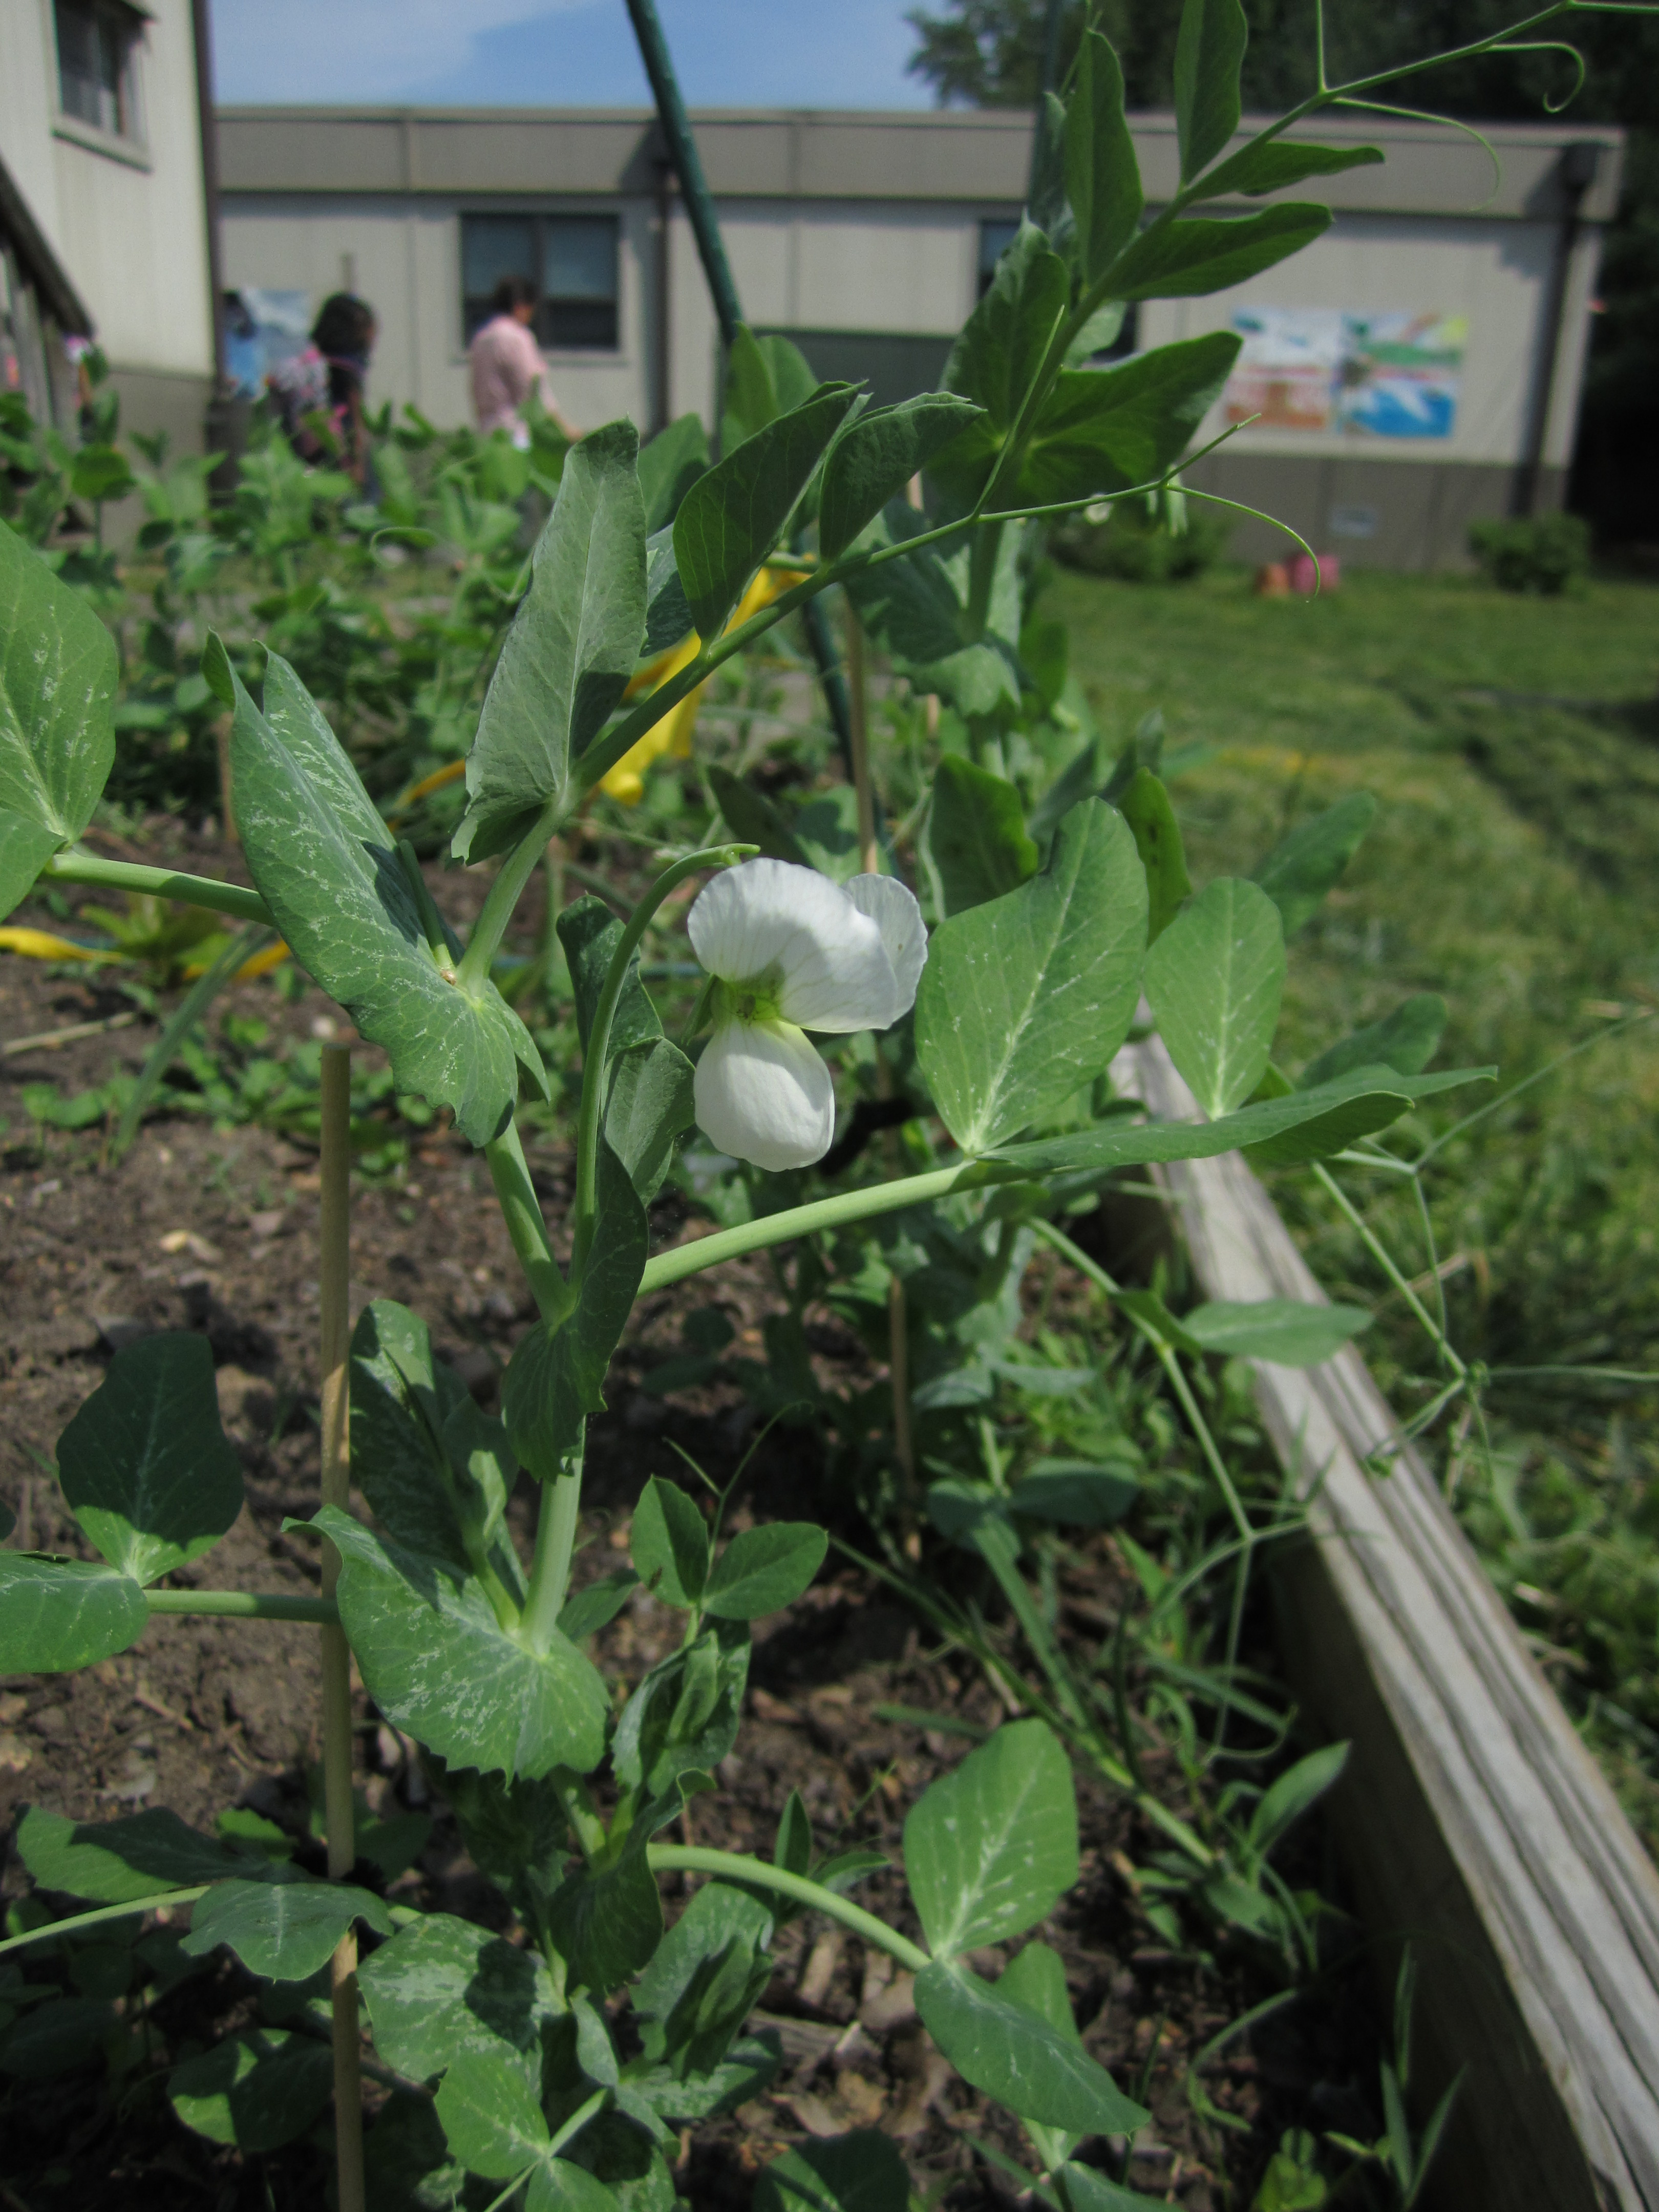 Pea plant and flower in a school garden.